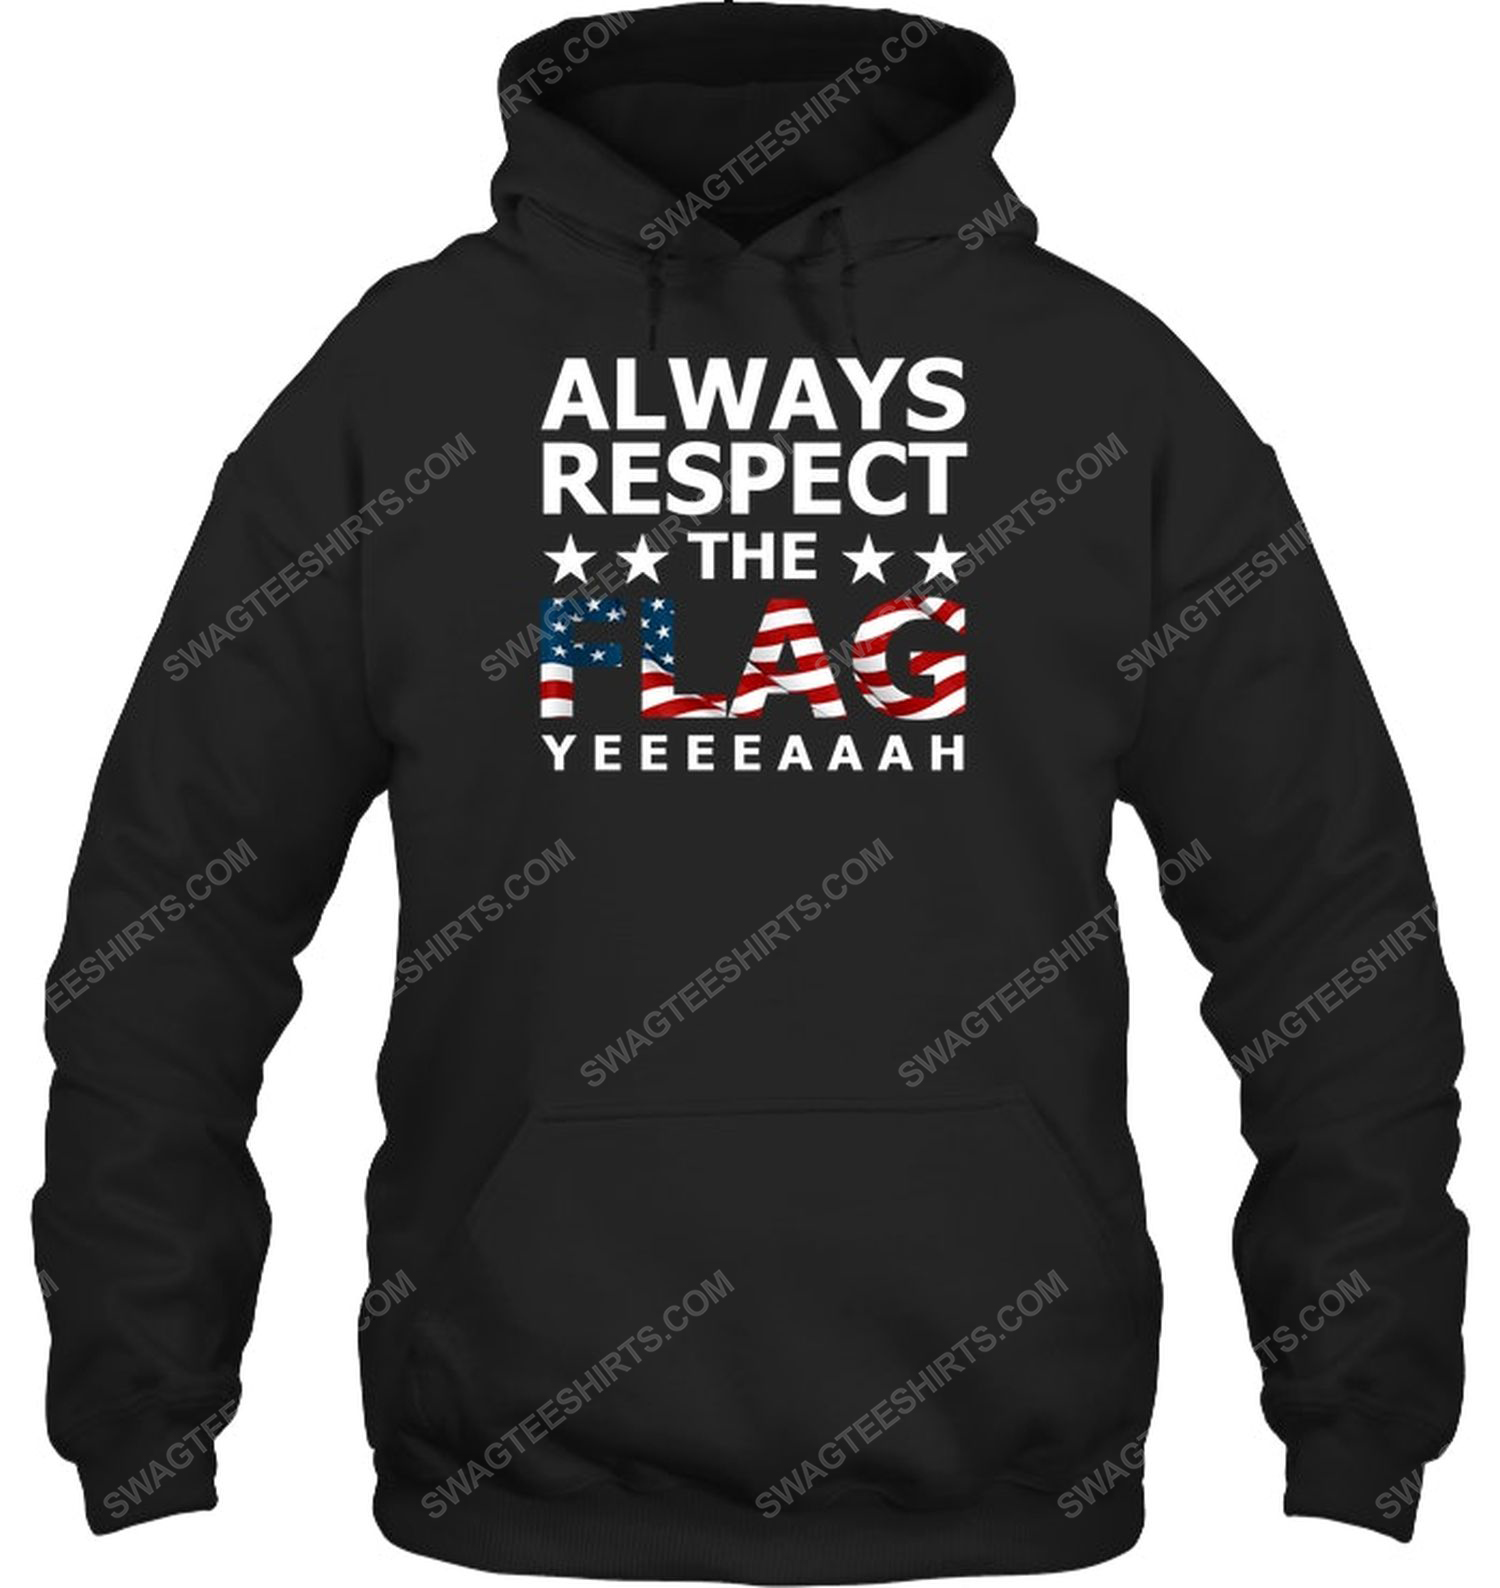 Always respect the flag yeah political hoodie